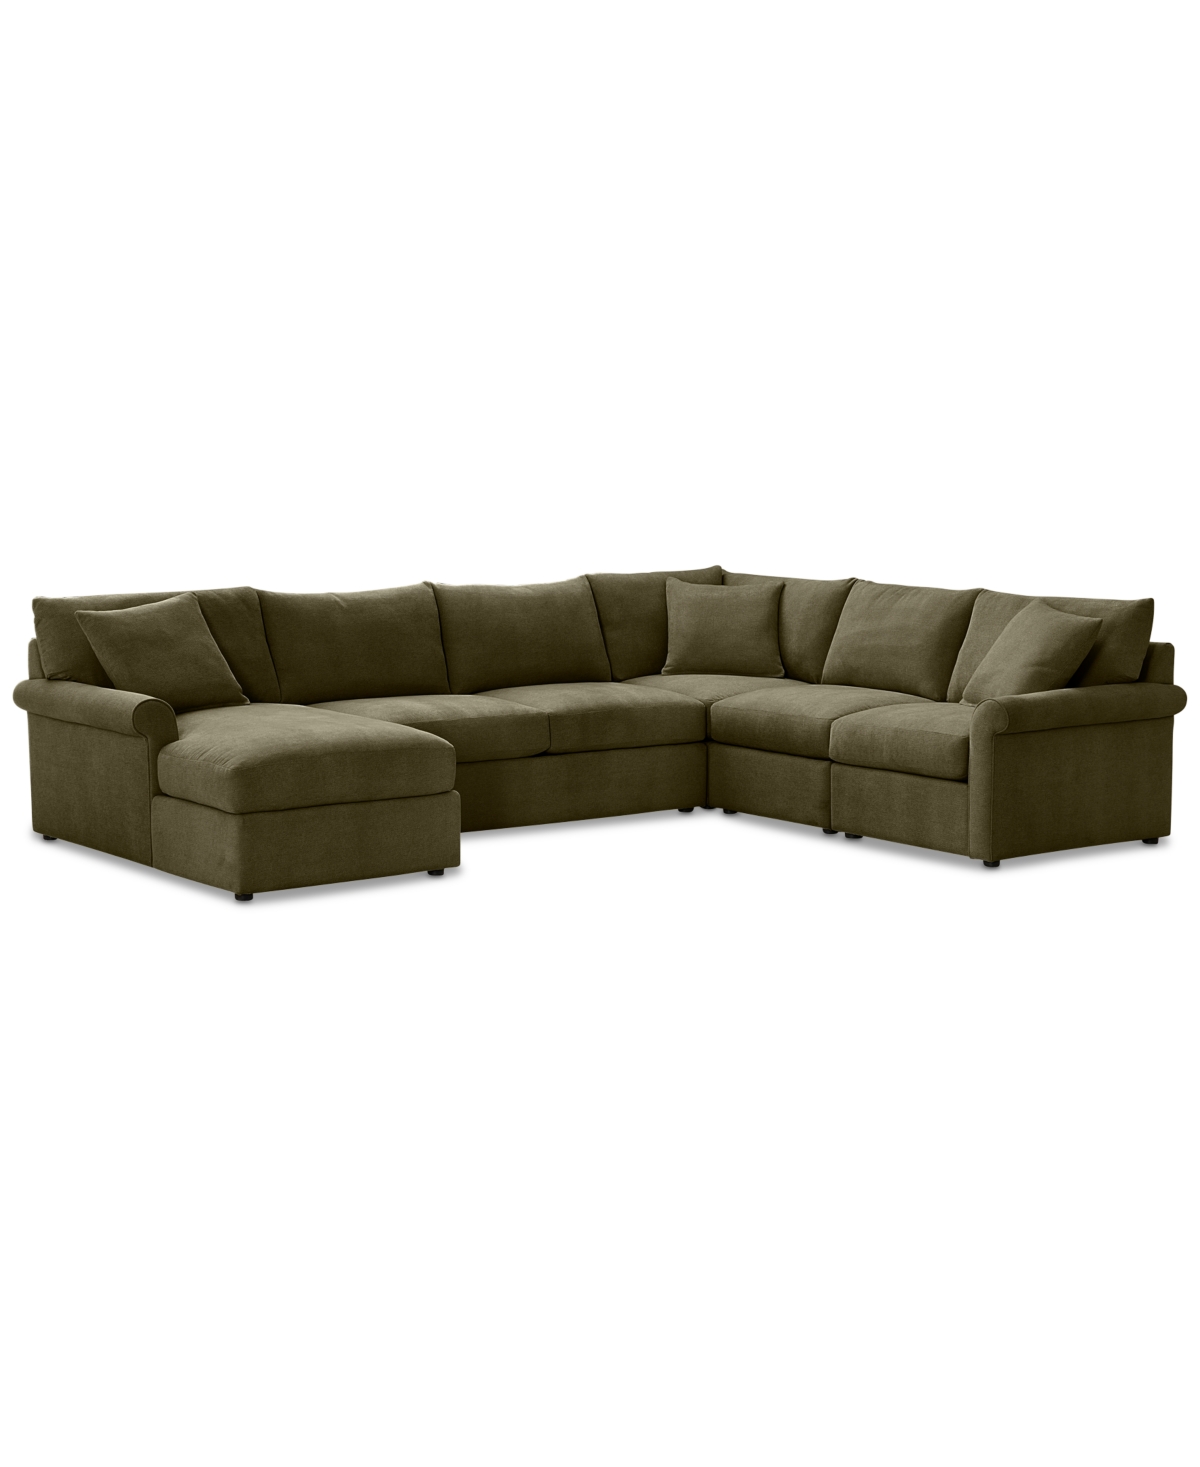 Furniture Wrenley 138" 5-pc. Fabric Modular Chaise Sectional Sofa, Created For Macy's In Olive